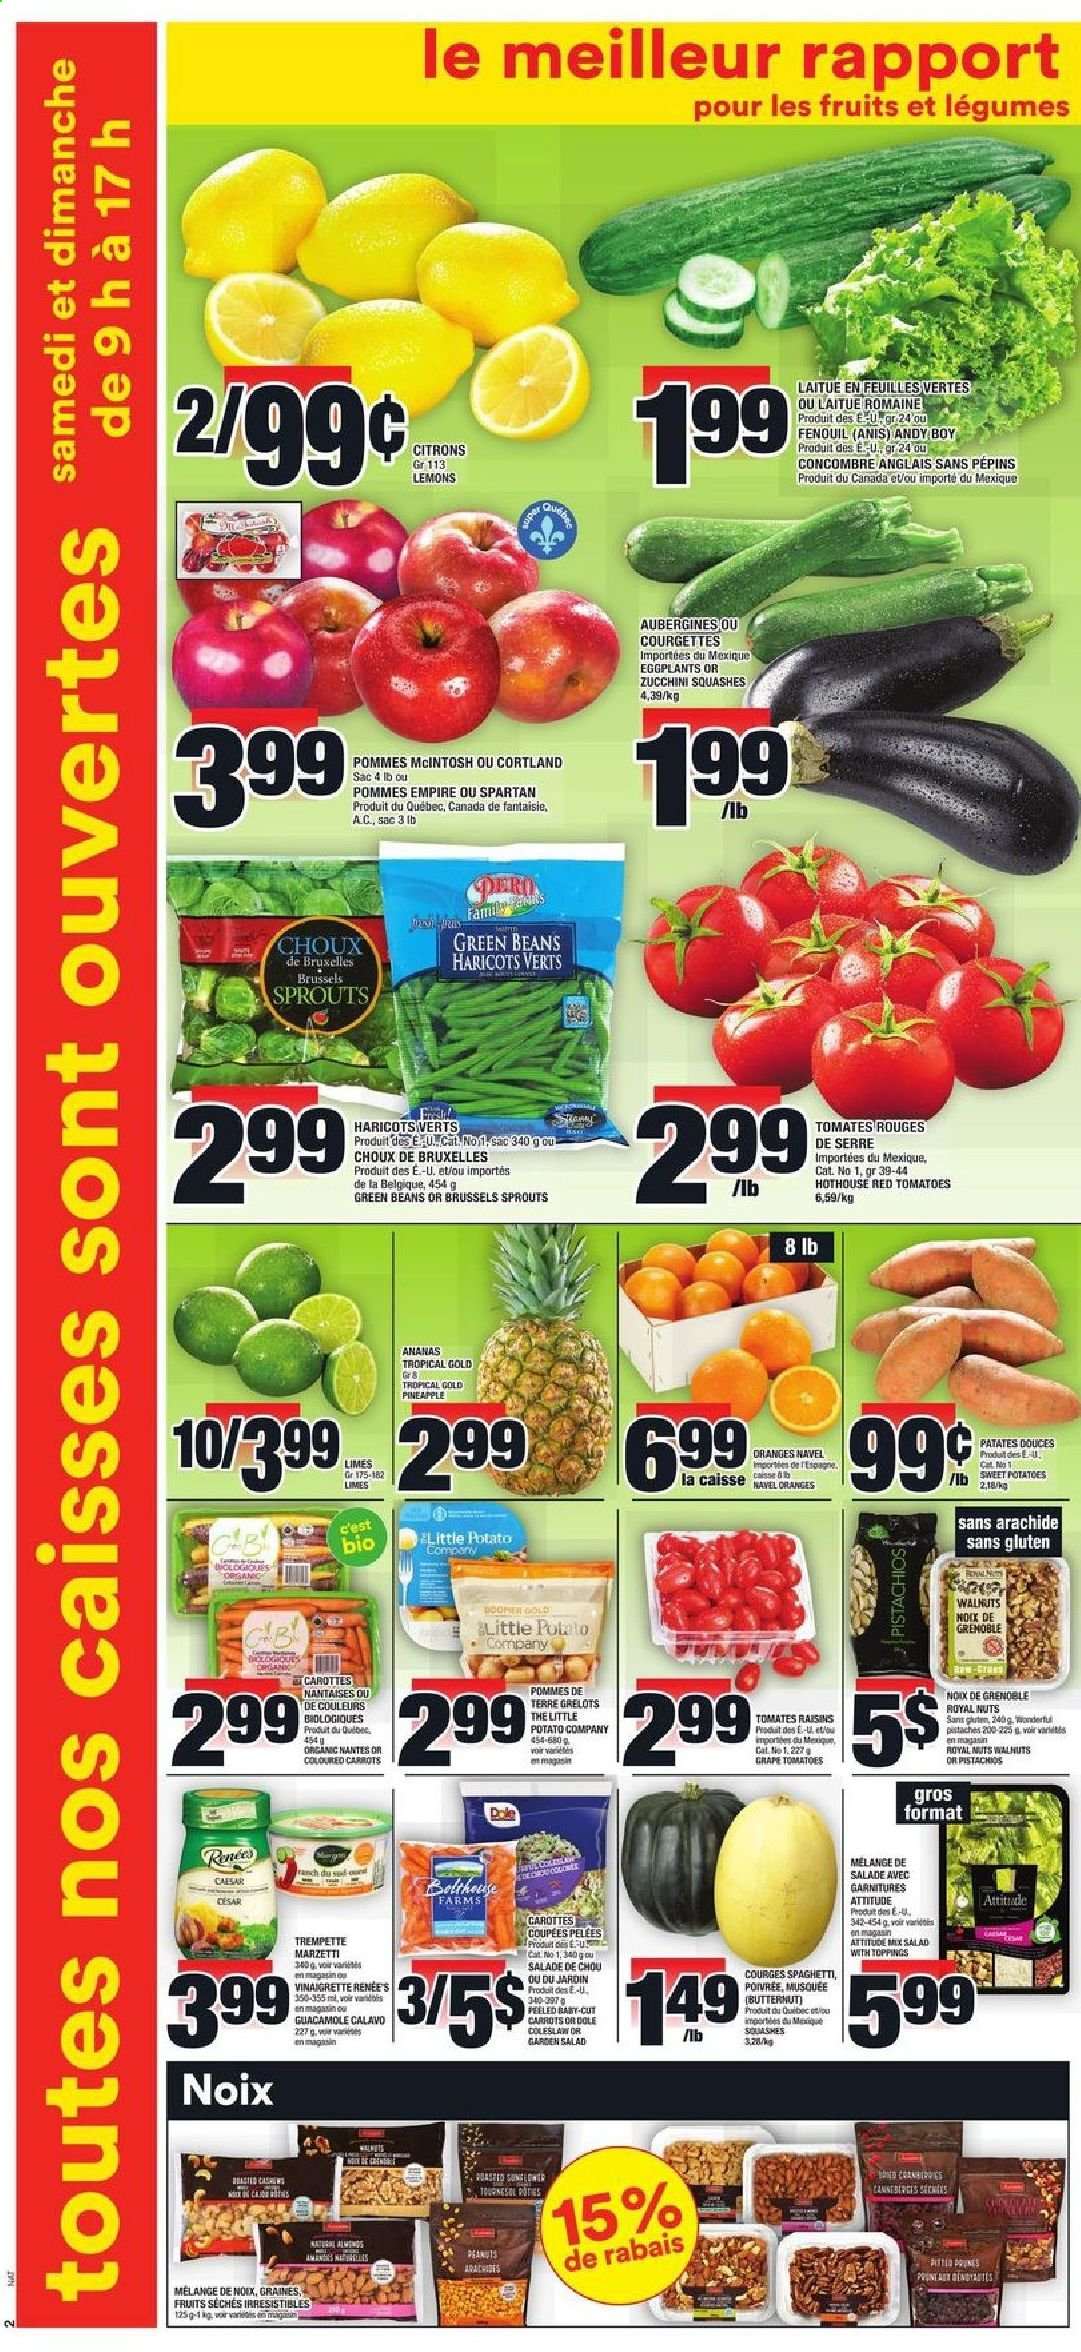 thumbnail - Super C Flyer - February 04, 2021 - February 10, 2021 - Sales products - beans, butternut squash, carrots, green beans, sweet potato, tomatoes, zucchini, potatoes, salad, Dole, eggplant, brussel sprouts, pineapple, lemons, navel oranges, coleslaw, spaghetti, guacamole, walnuts, dried fruit, pistachios, raisins. Page 3.